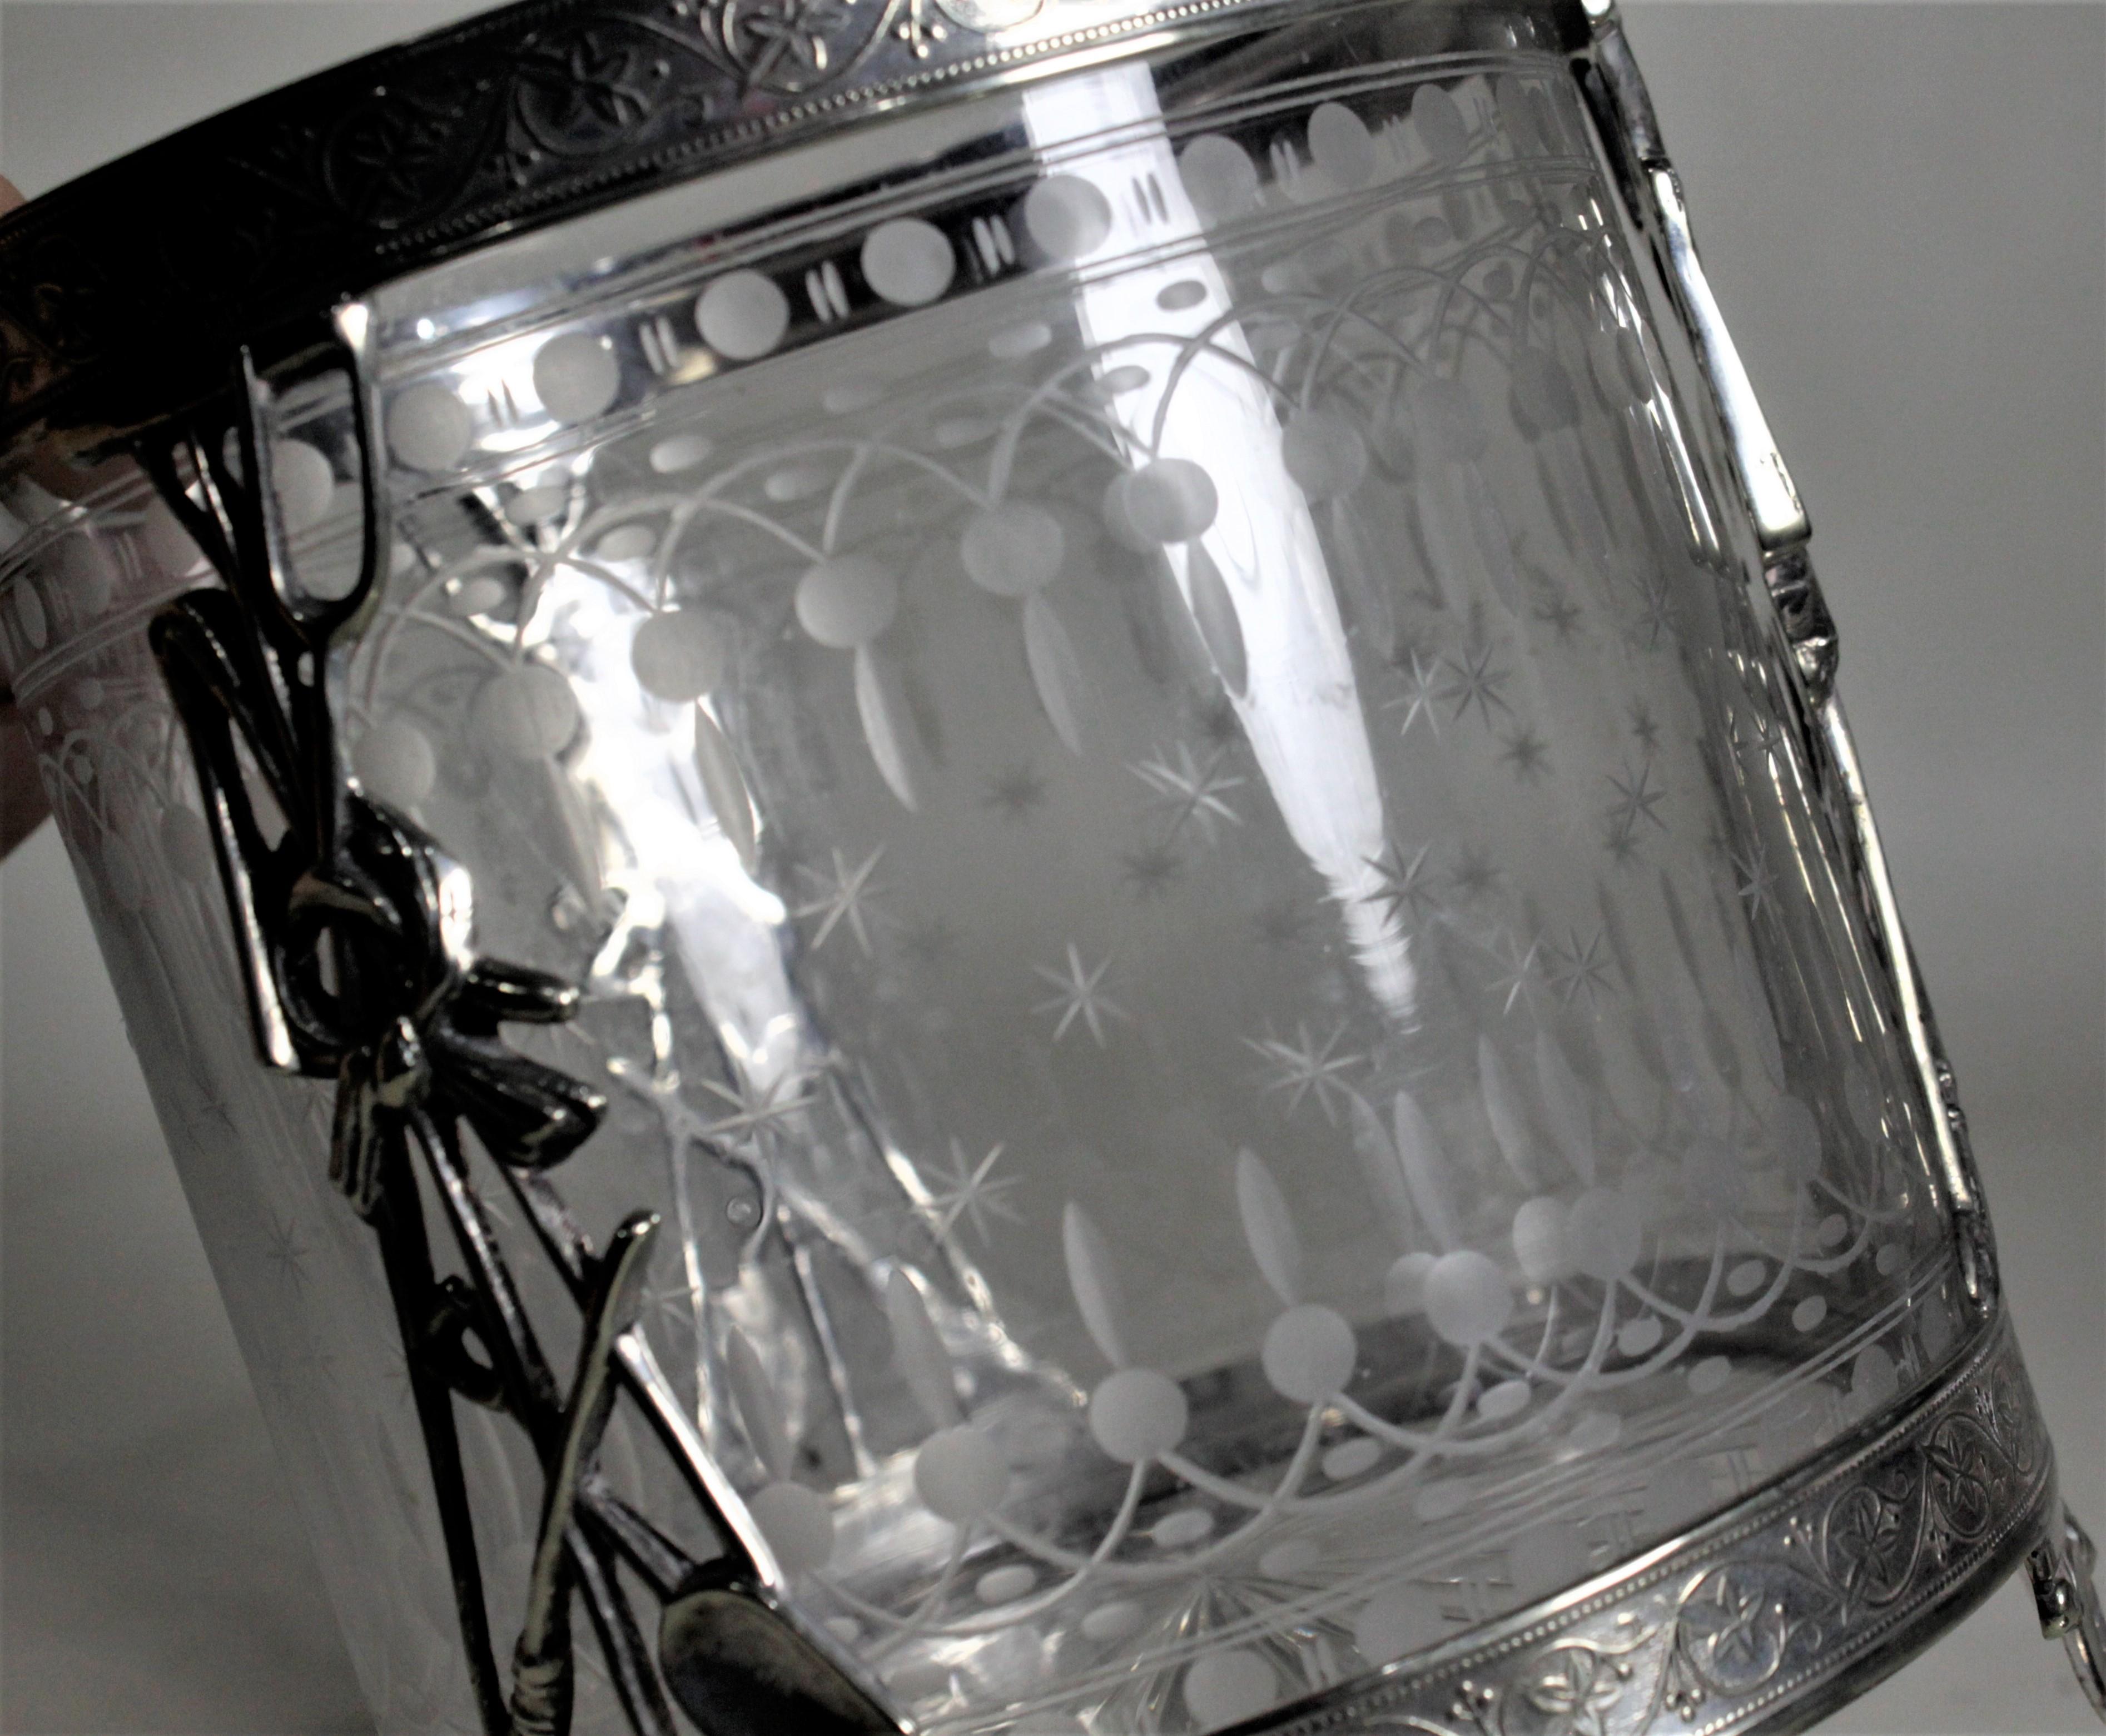 Antique Silver Plated Biscuit Barrel with Figural Decor & Etched Glass Insert 9